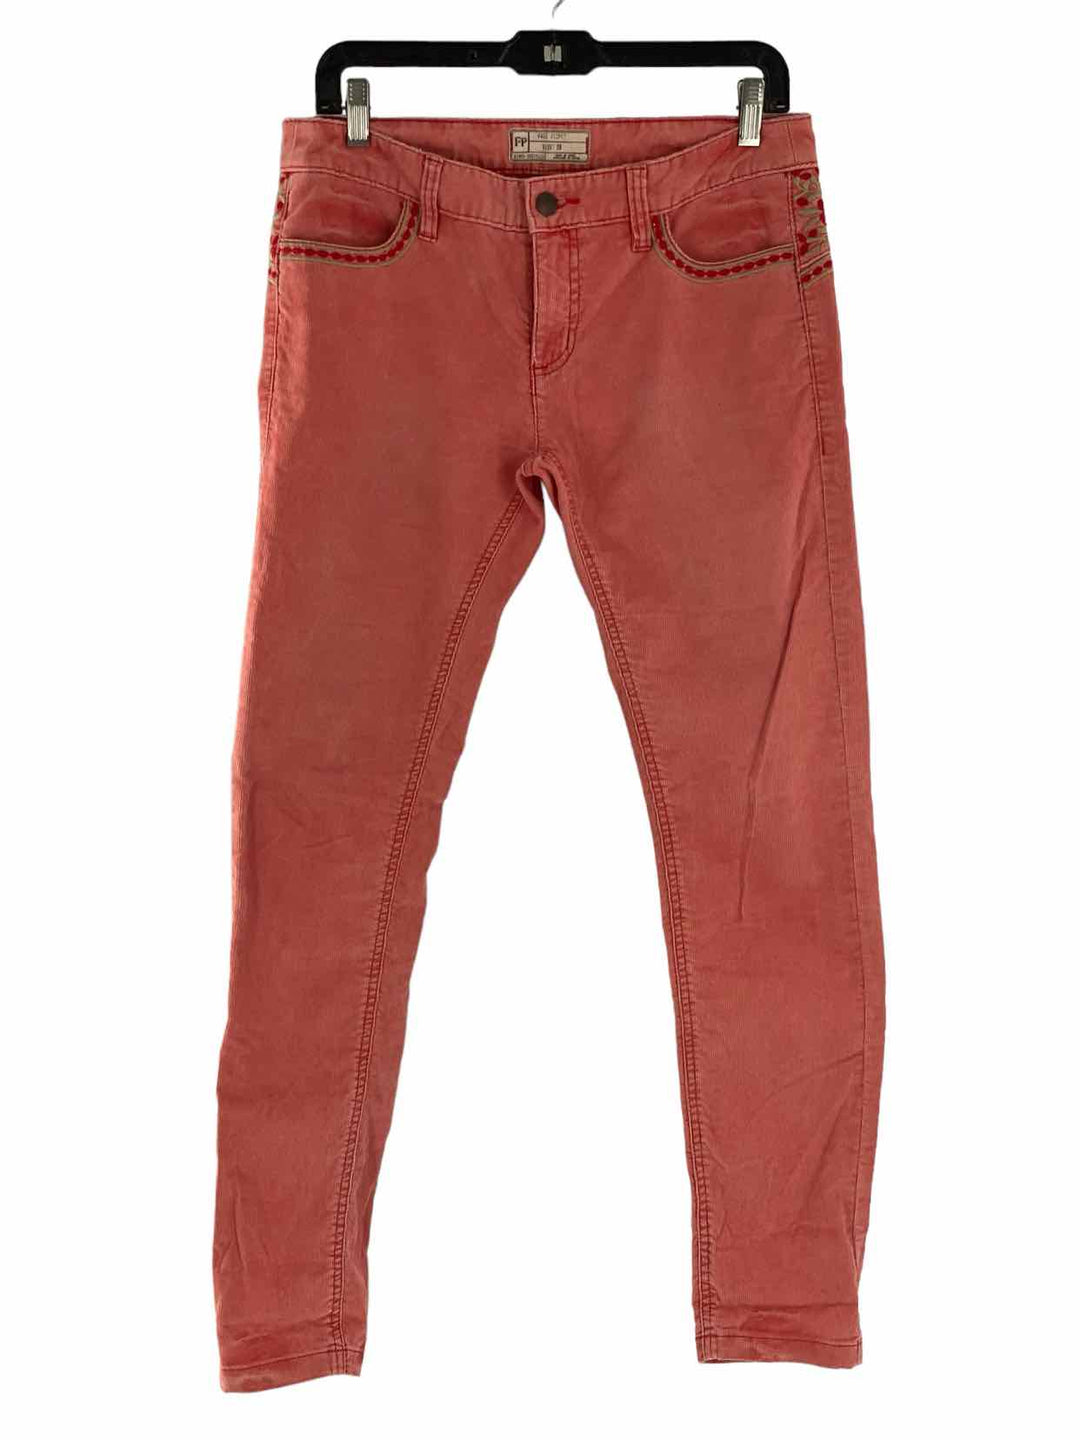 Free People Size 28 Coral Floral Corduroy Pants